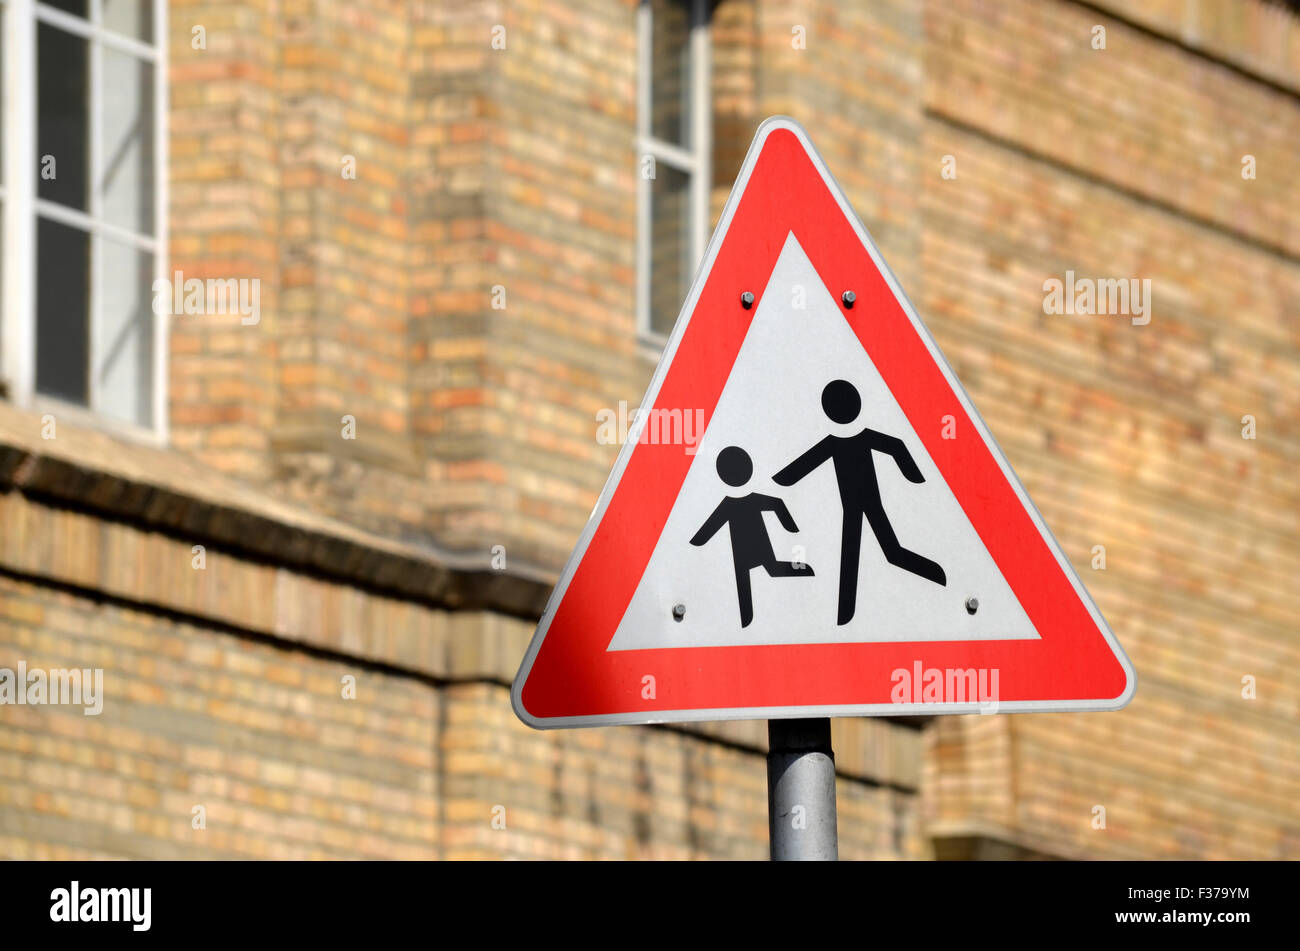 Road sign, warning, children playing, Germany Stock Photo